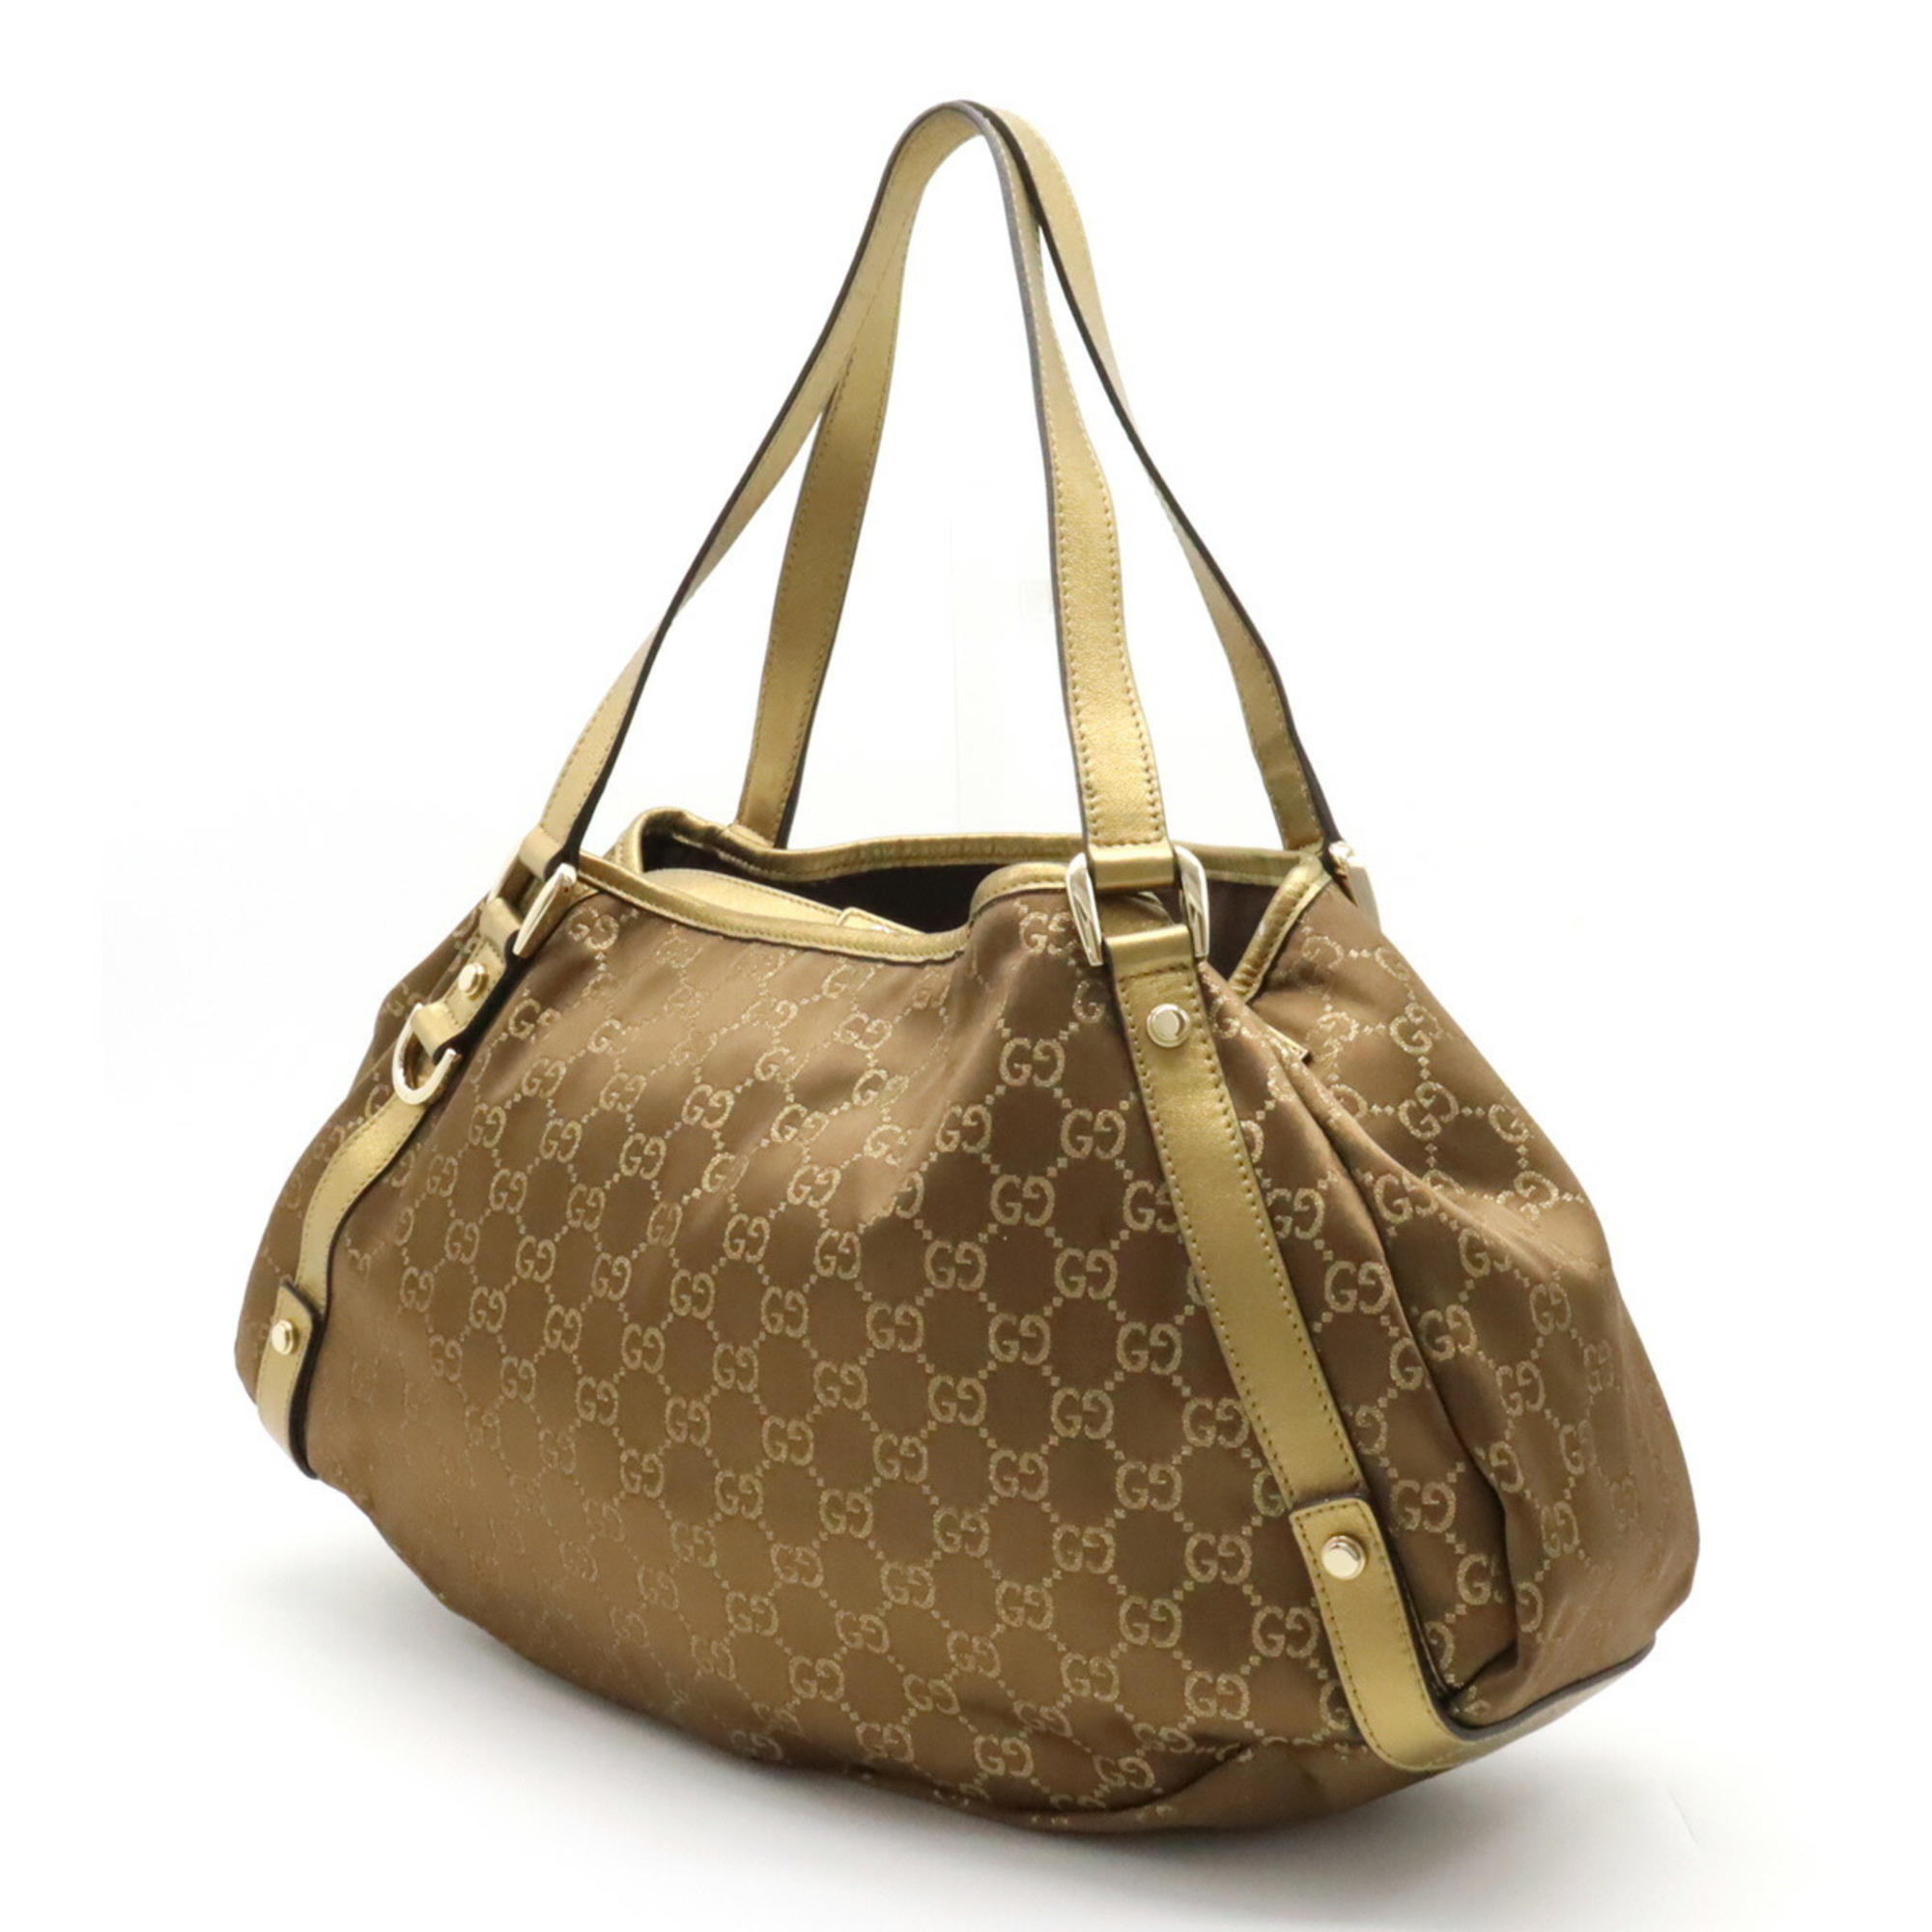 GUCCI GG Canvas Abby Tote Bag Shoulder Metallic Leather Gold Brown 130736